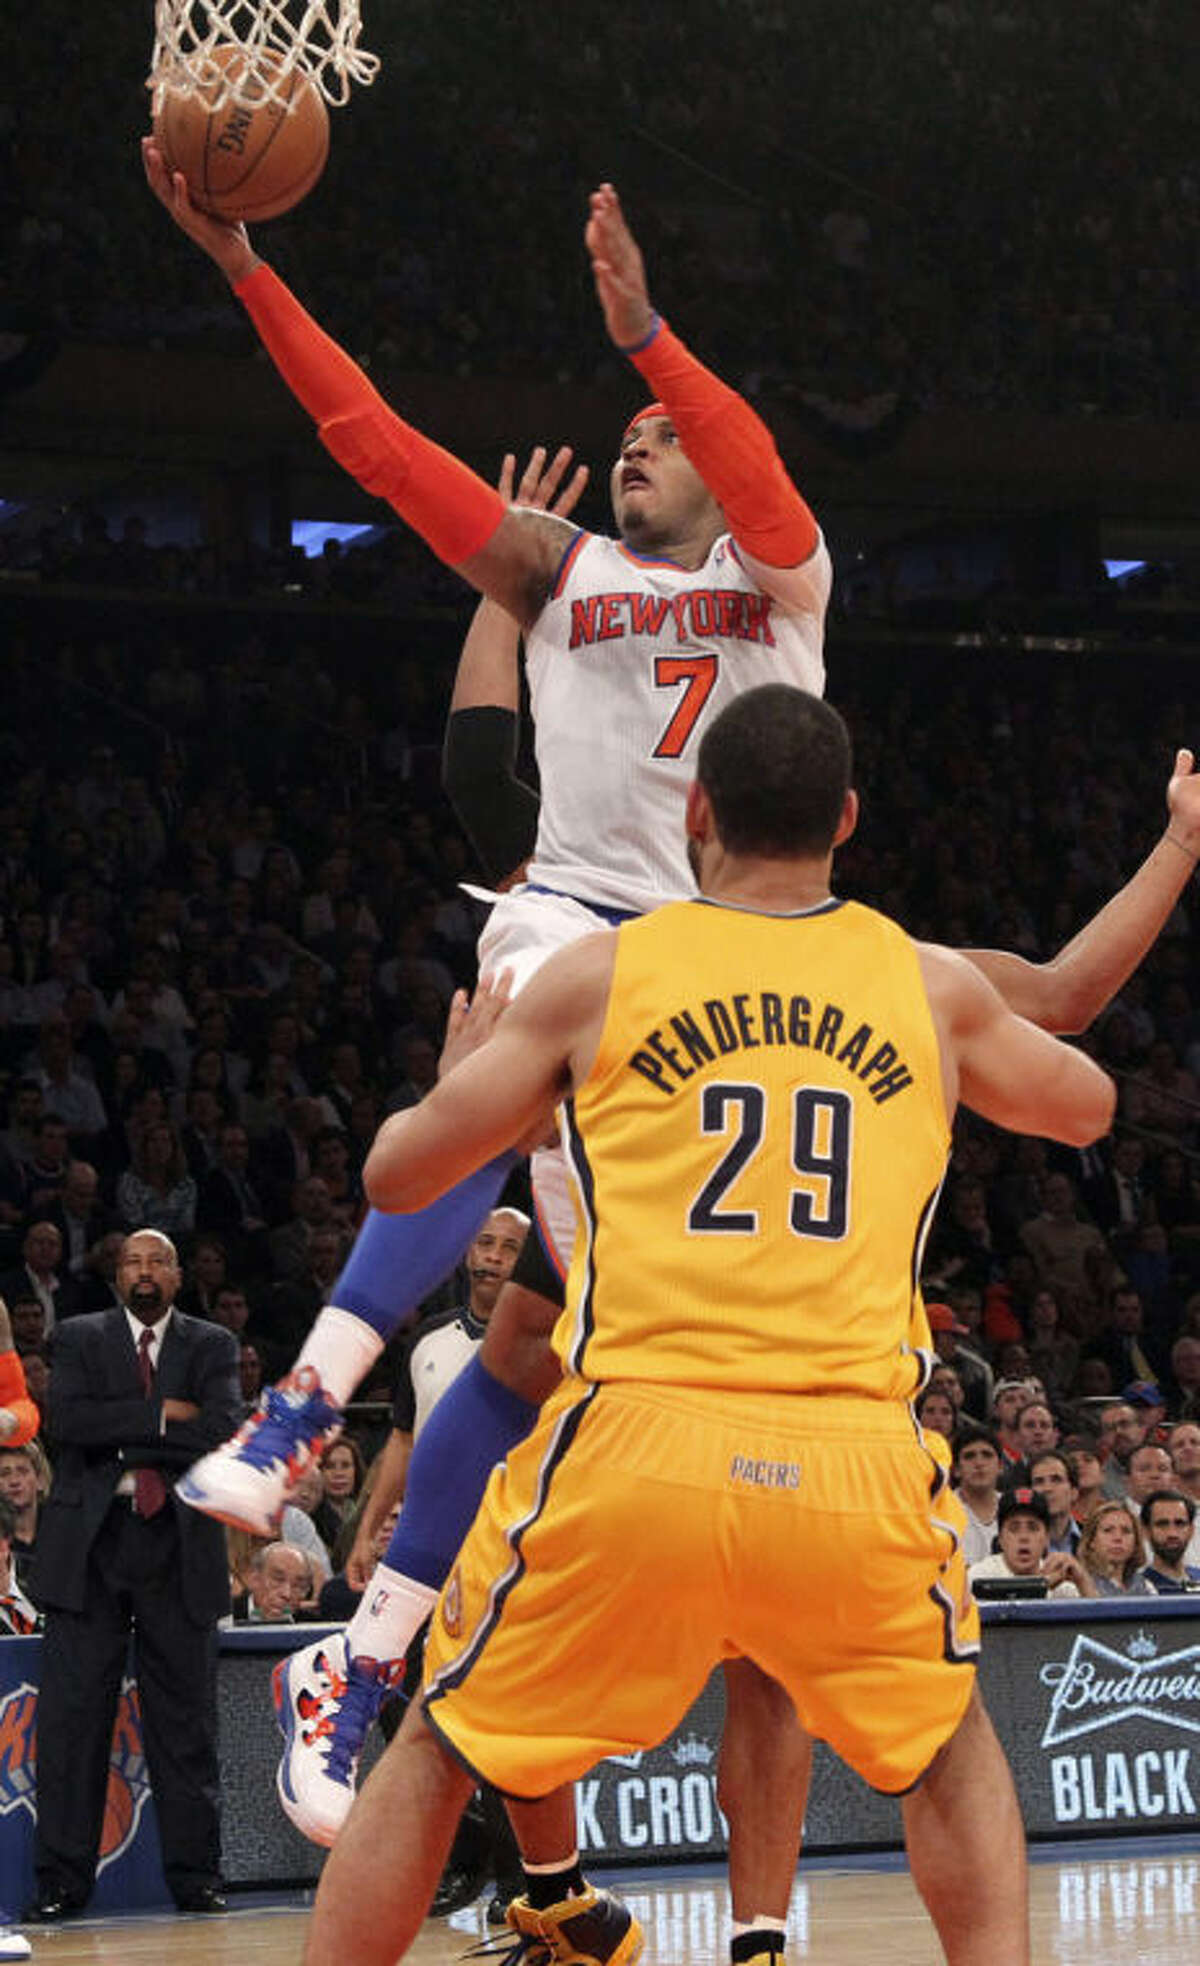 New York Knicks' Carmelo Anthony (7) shoots past Indiana Pacers' Jeff Pendergraph in the second half of Game 2 of their NBA basketball playoff series in the Eastern Conference semifinals at Madison Square Garden in New York, Tuesday, May 7, 2013. The Knicks won 105-79. (AP Photo/Mary Altaffer)